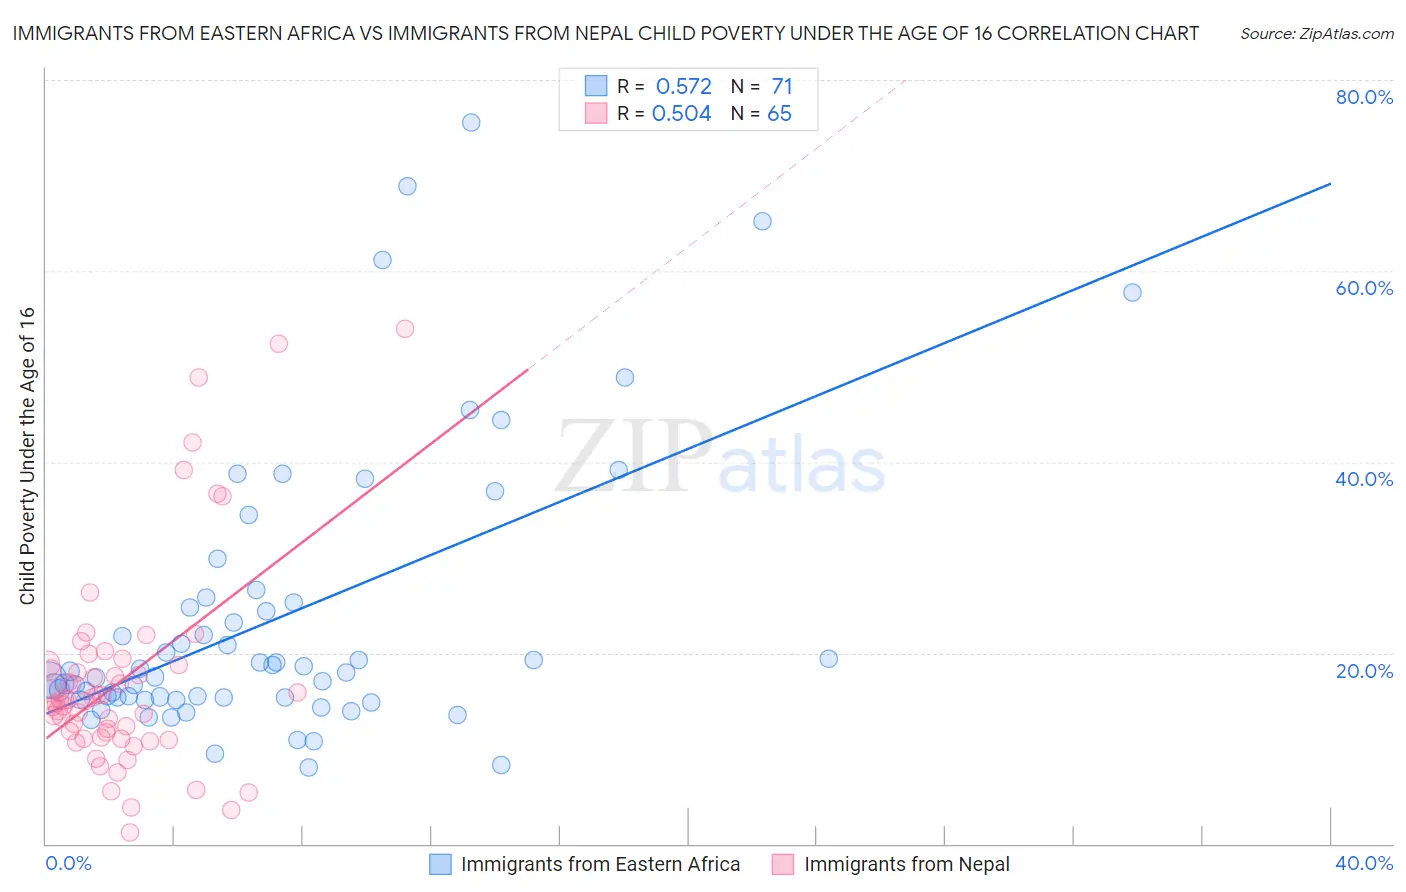 Immigrants from Eastern Africa vs Immigrants from Nepal Child Poverty Under the Age of 16